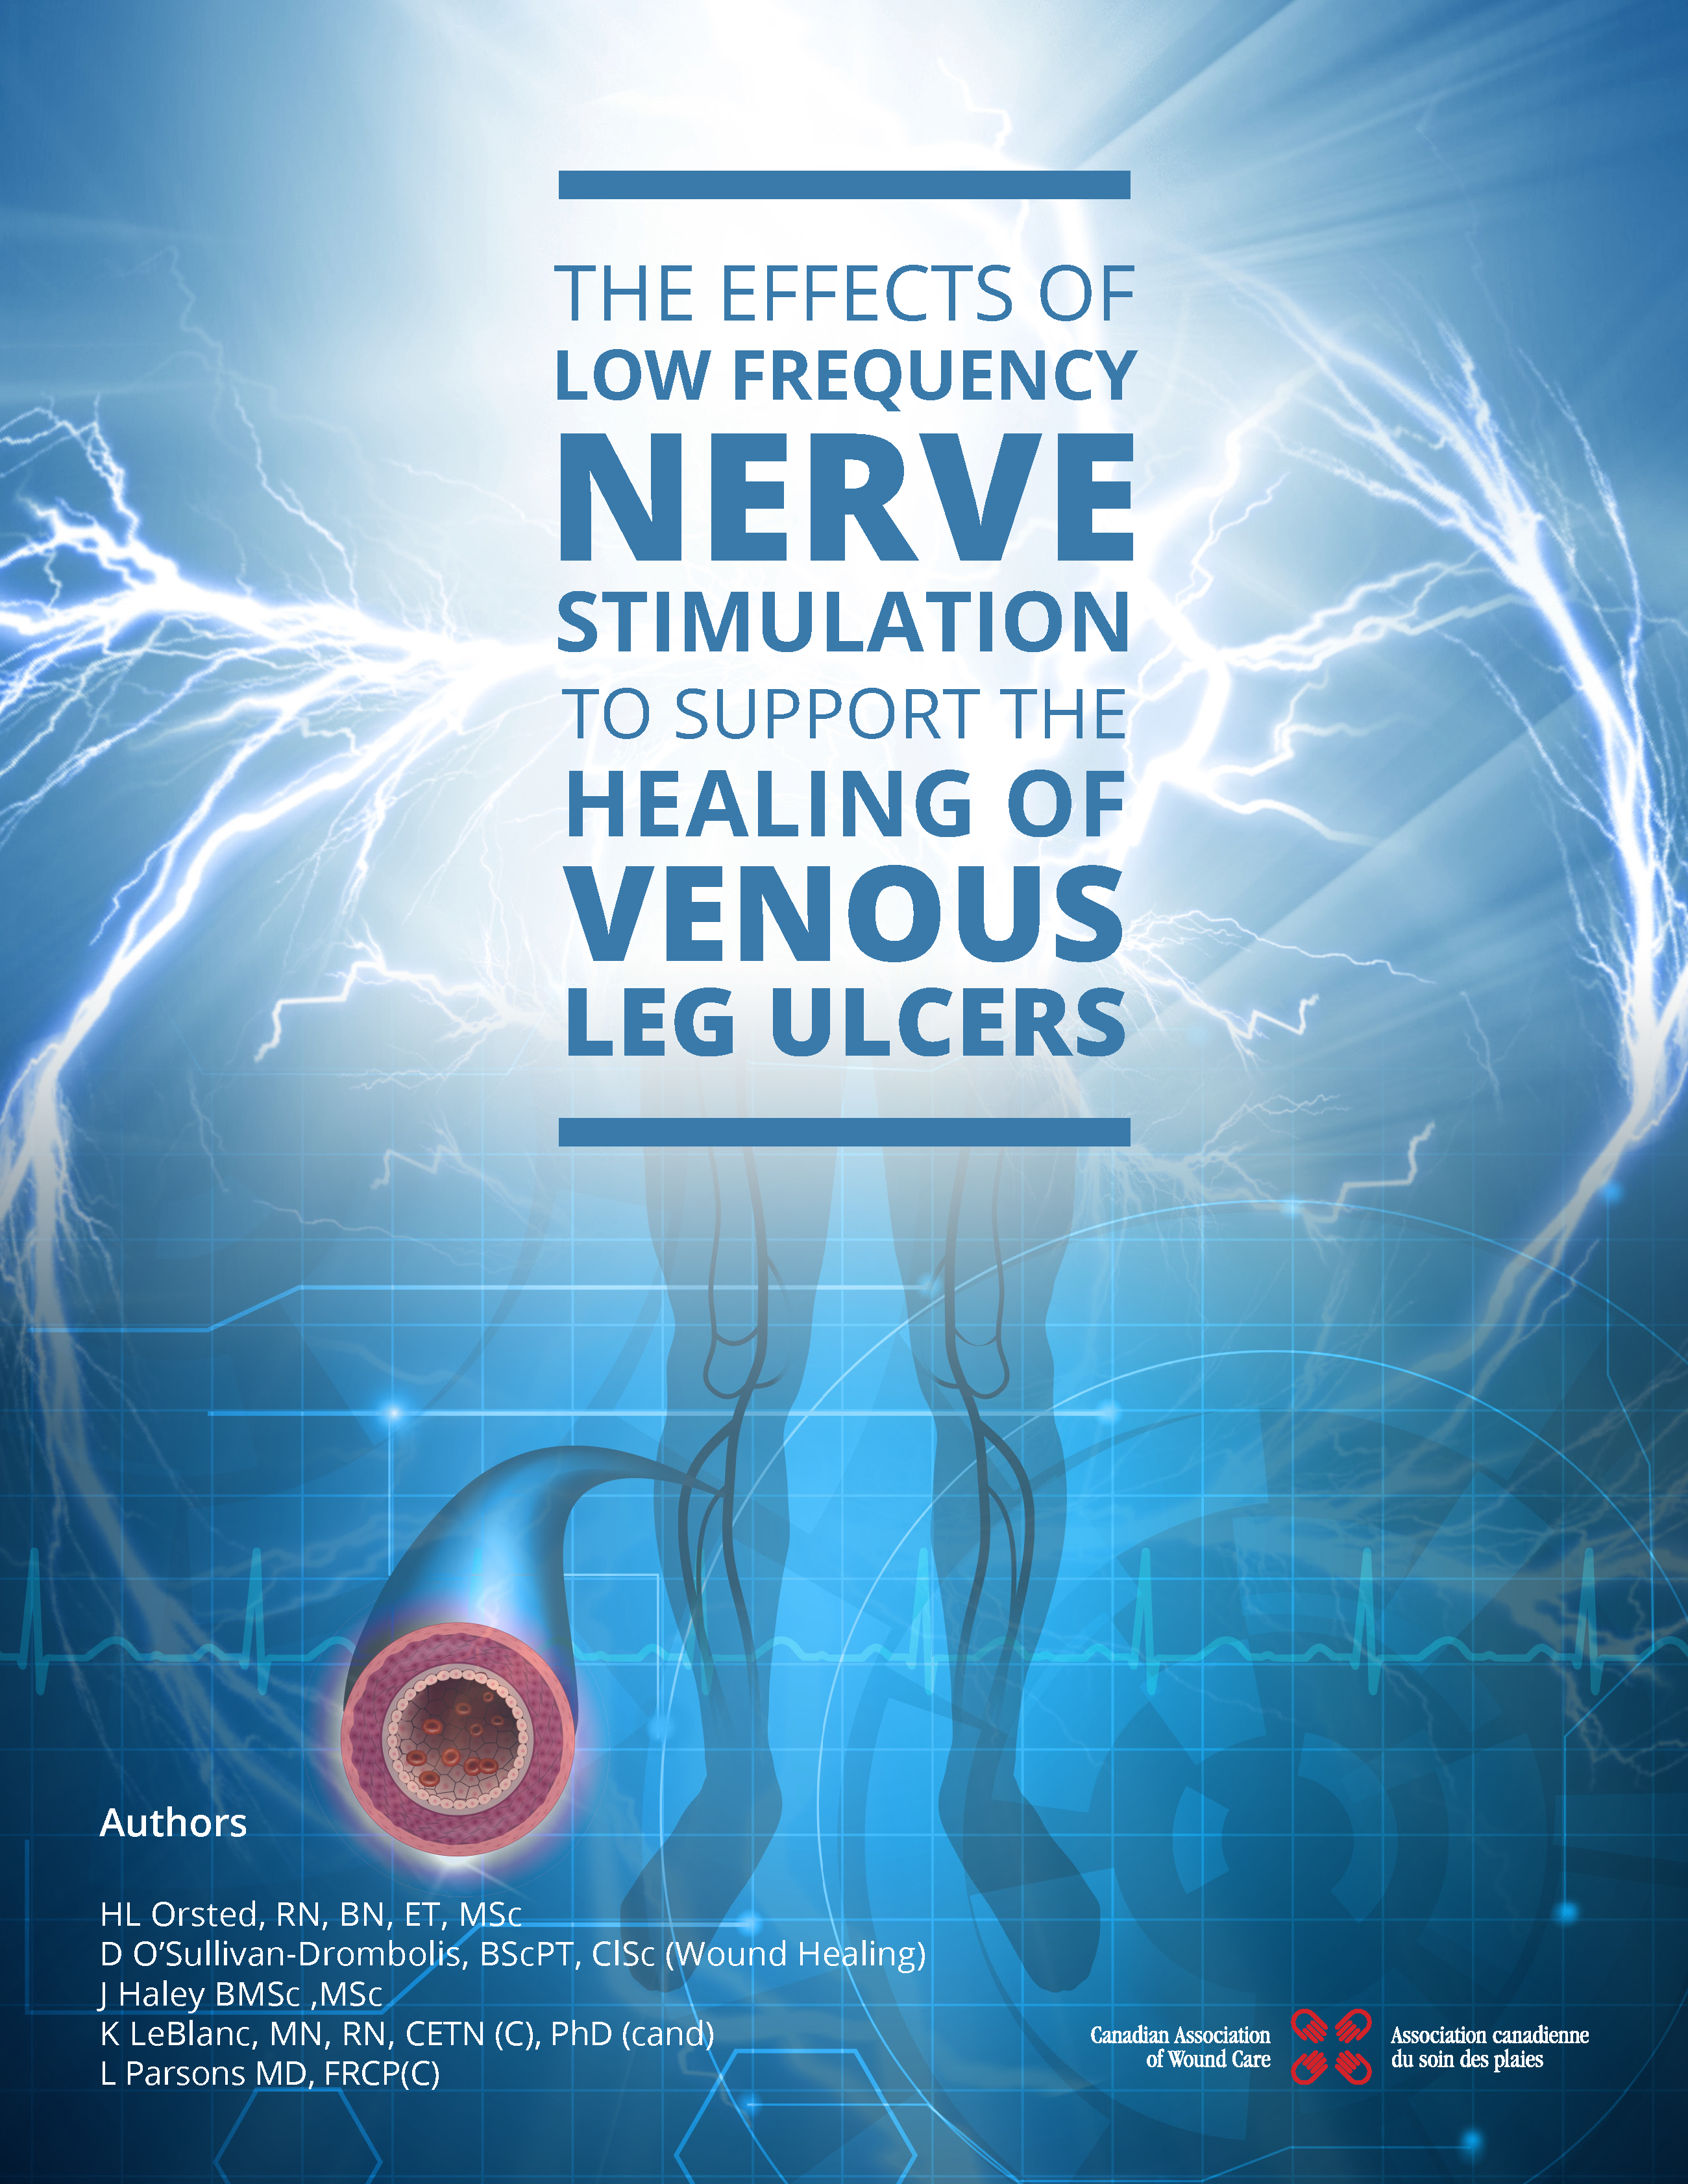 The Effects of Low Frequency Nerve Stimulation to Support the Healing of Venous Leg Ulcers